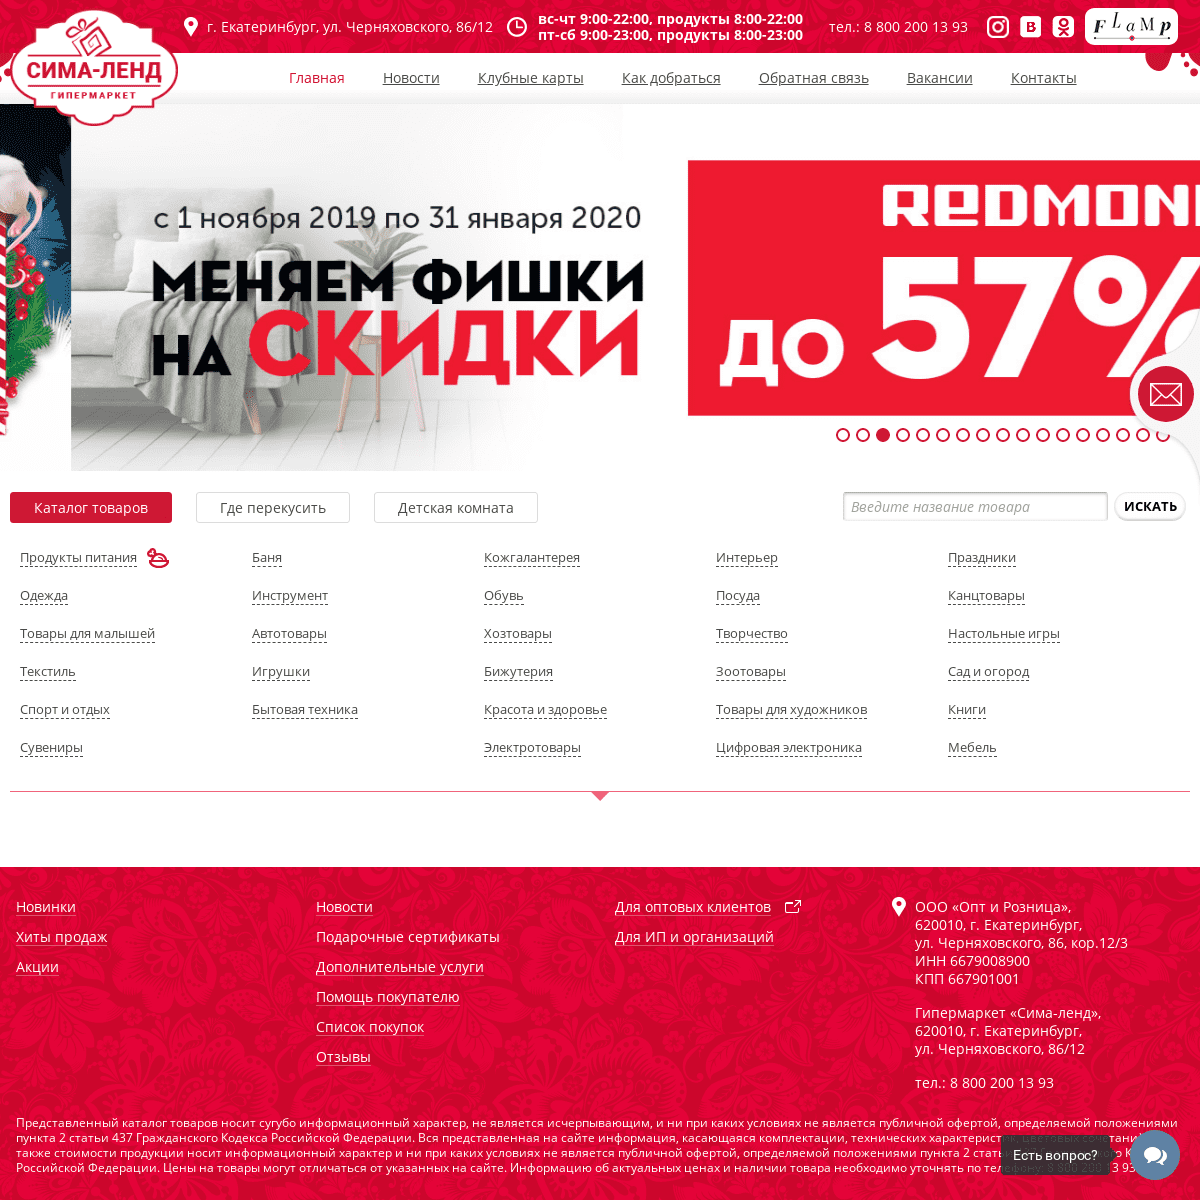 A complete backup of simamarket.ru